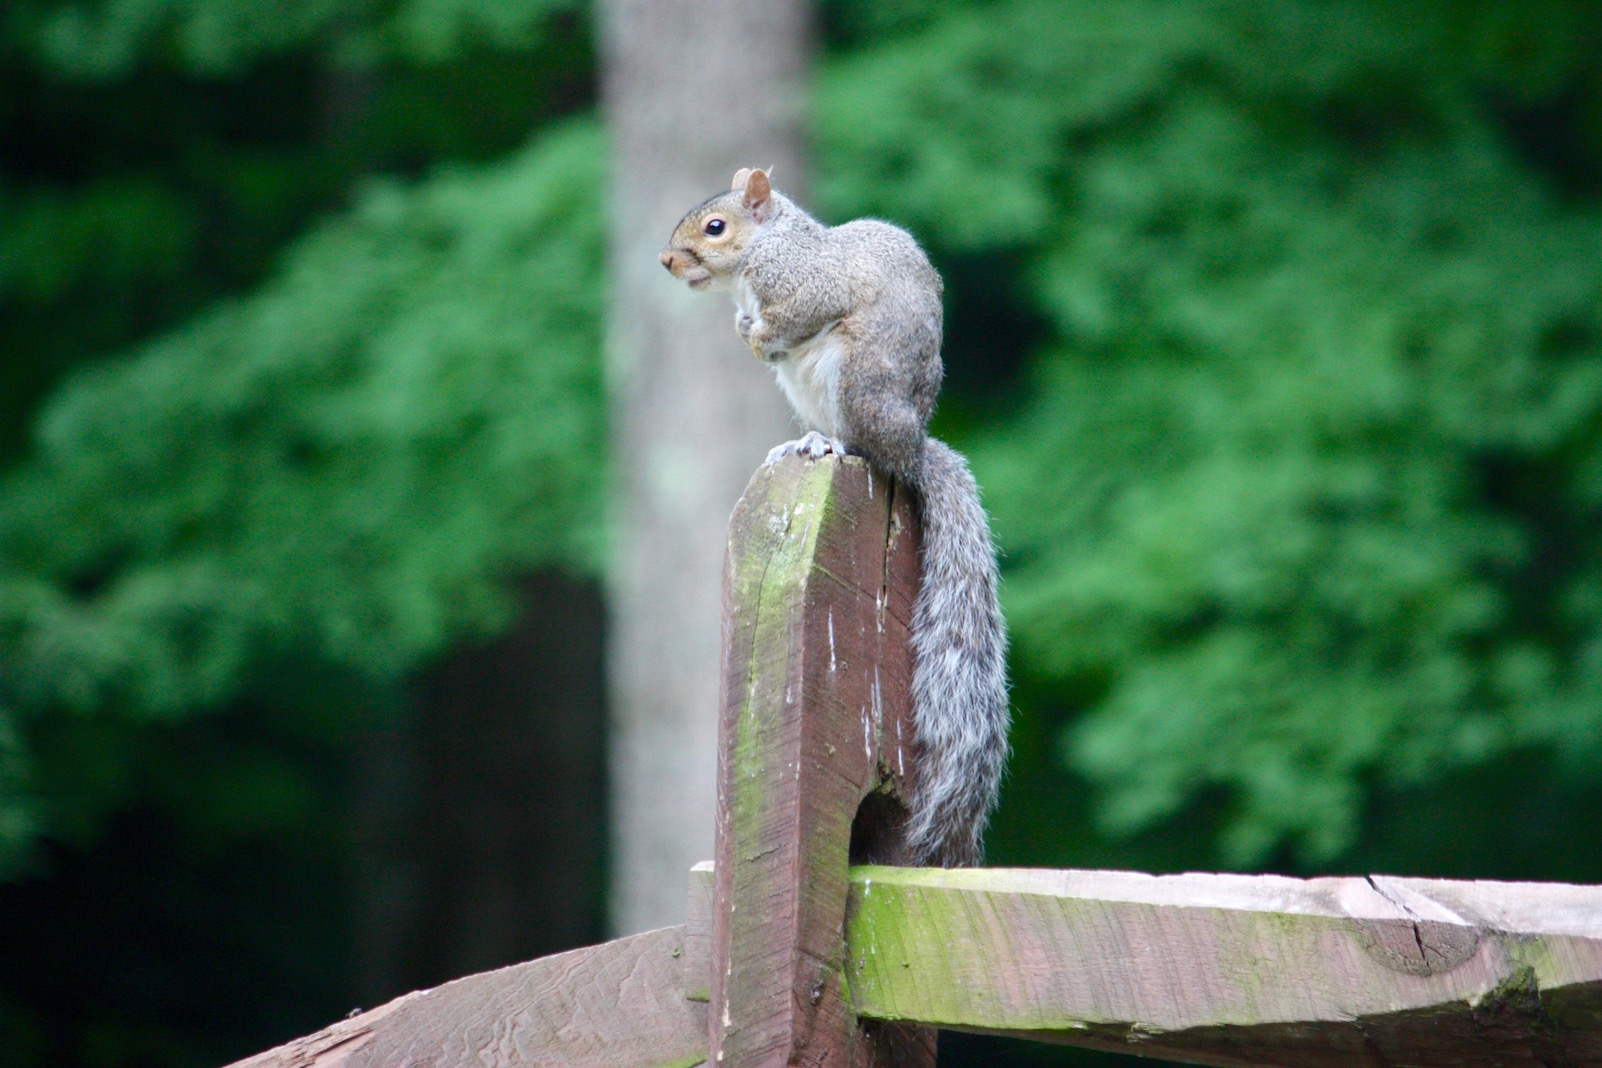 Photo I took of a squirrel sitting on a wooden fence post